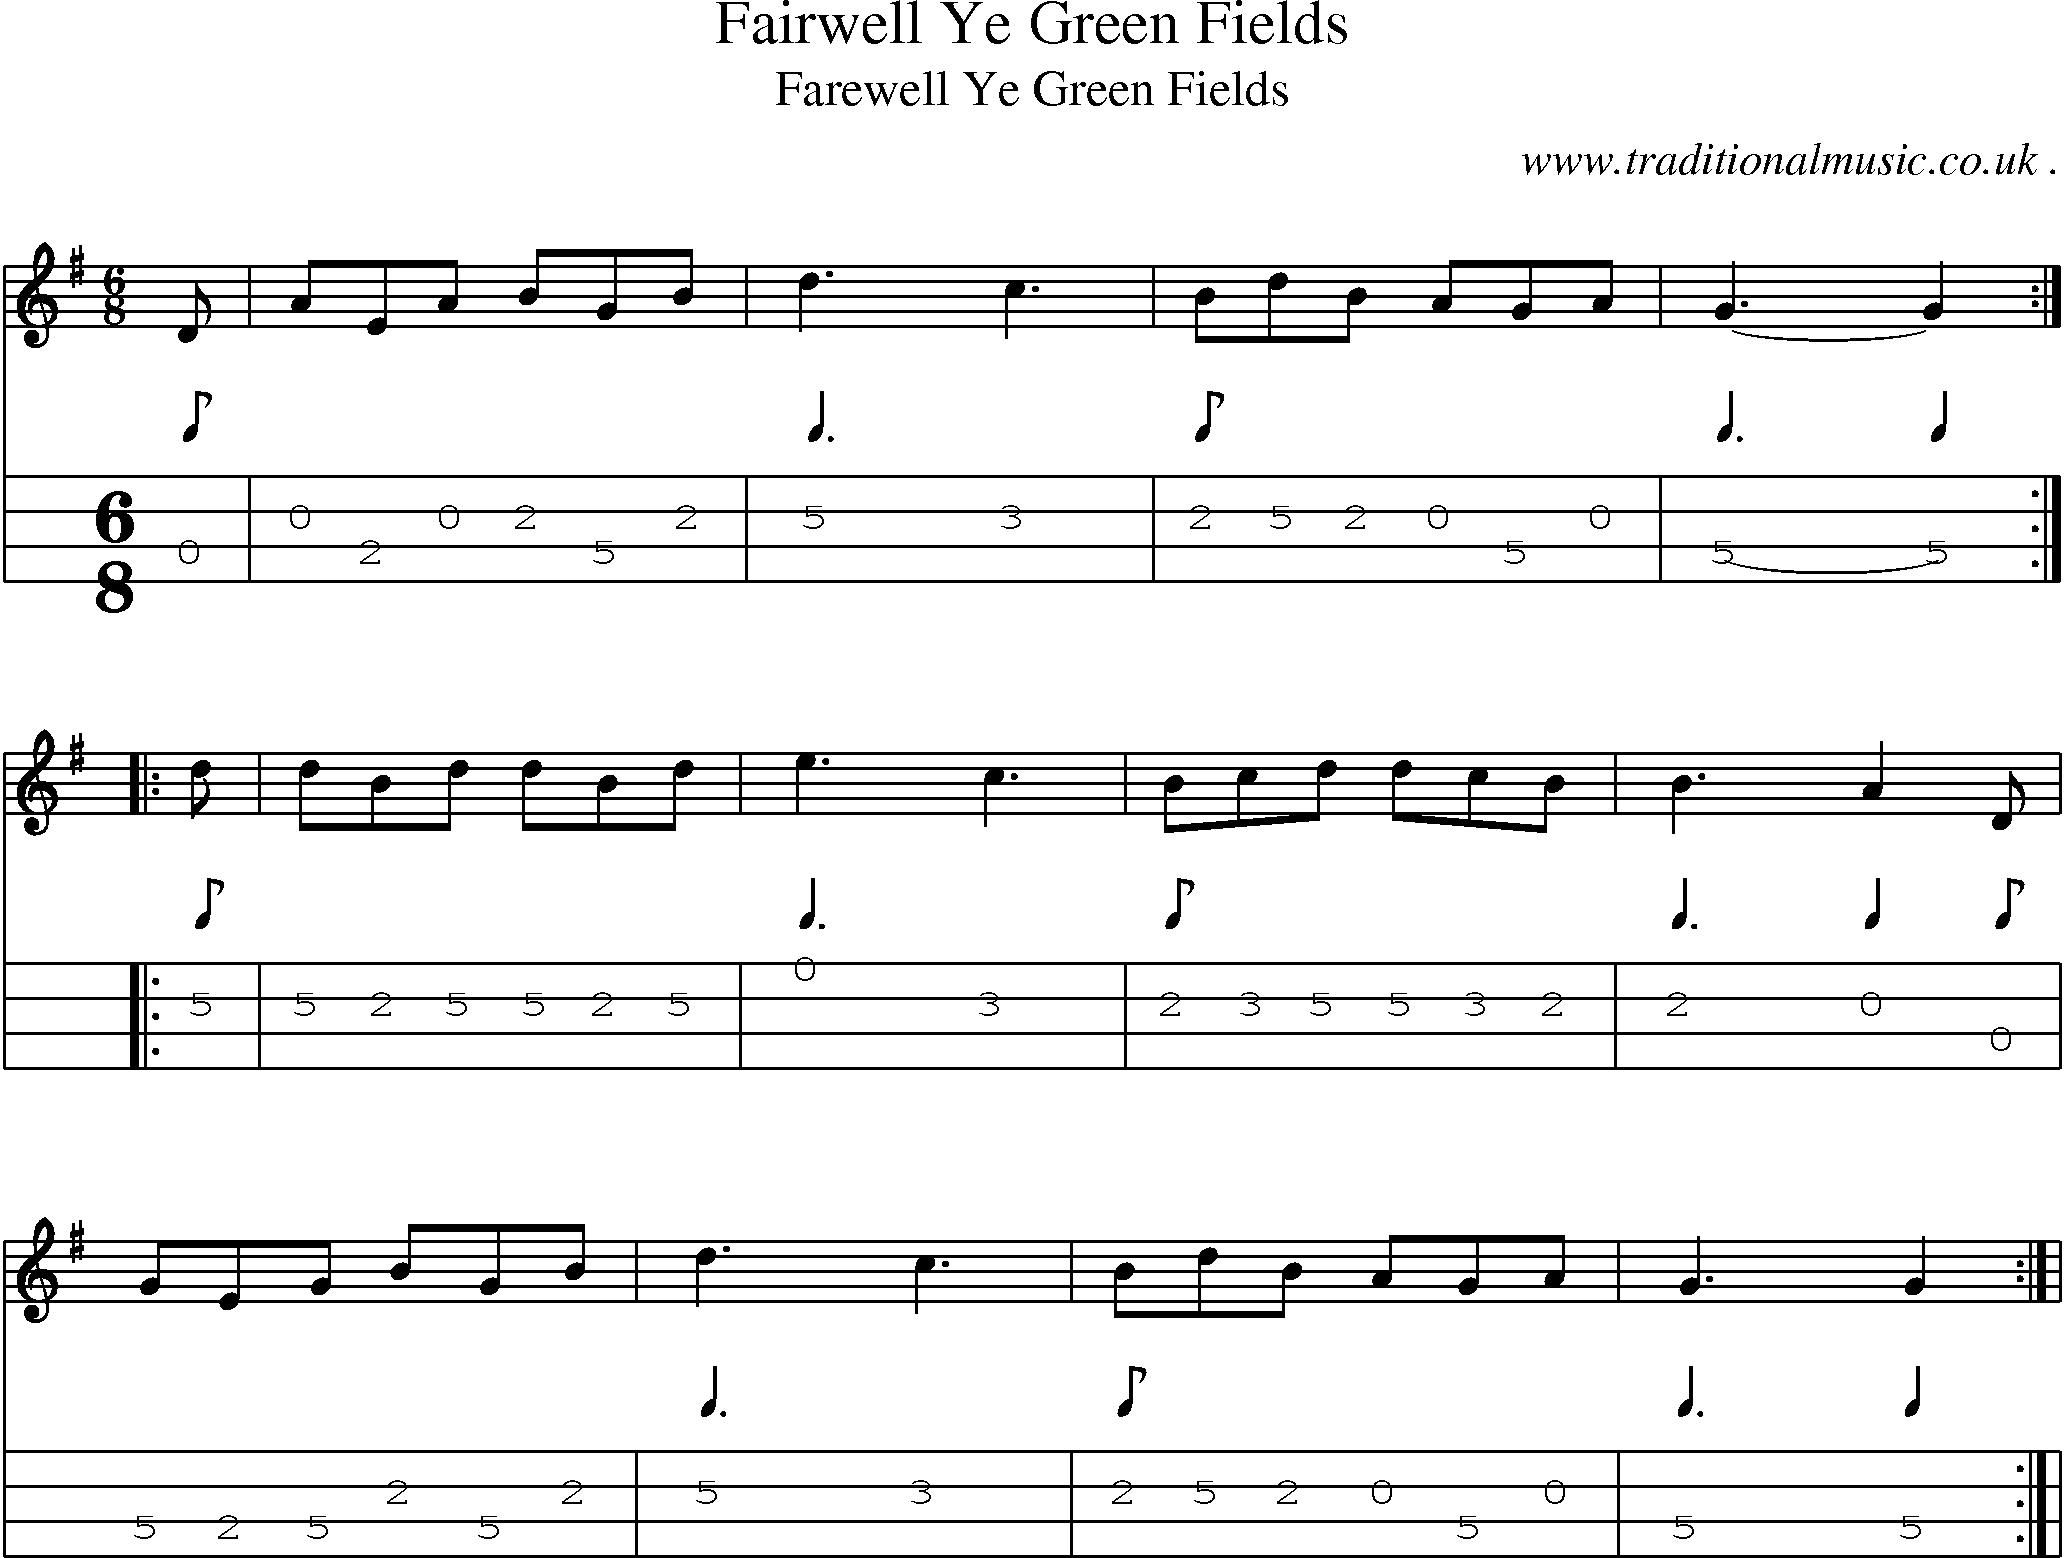 Sheet-Music and Mandolin Tabs for Fairwell Ye Green Fields